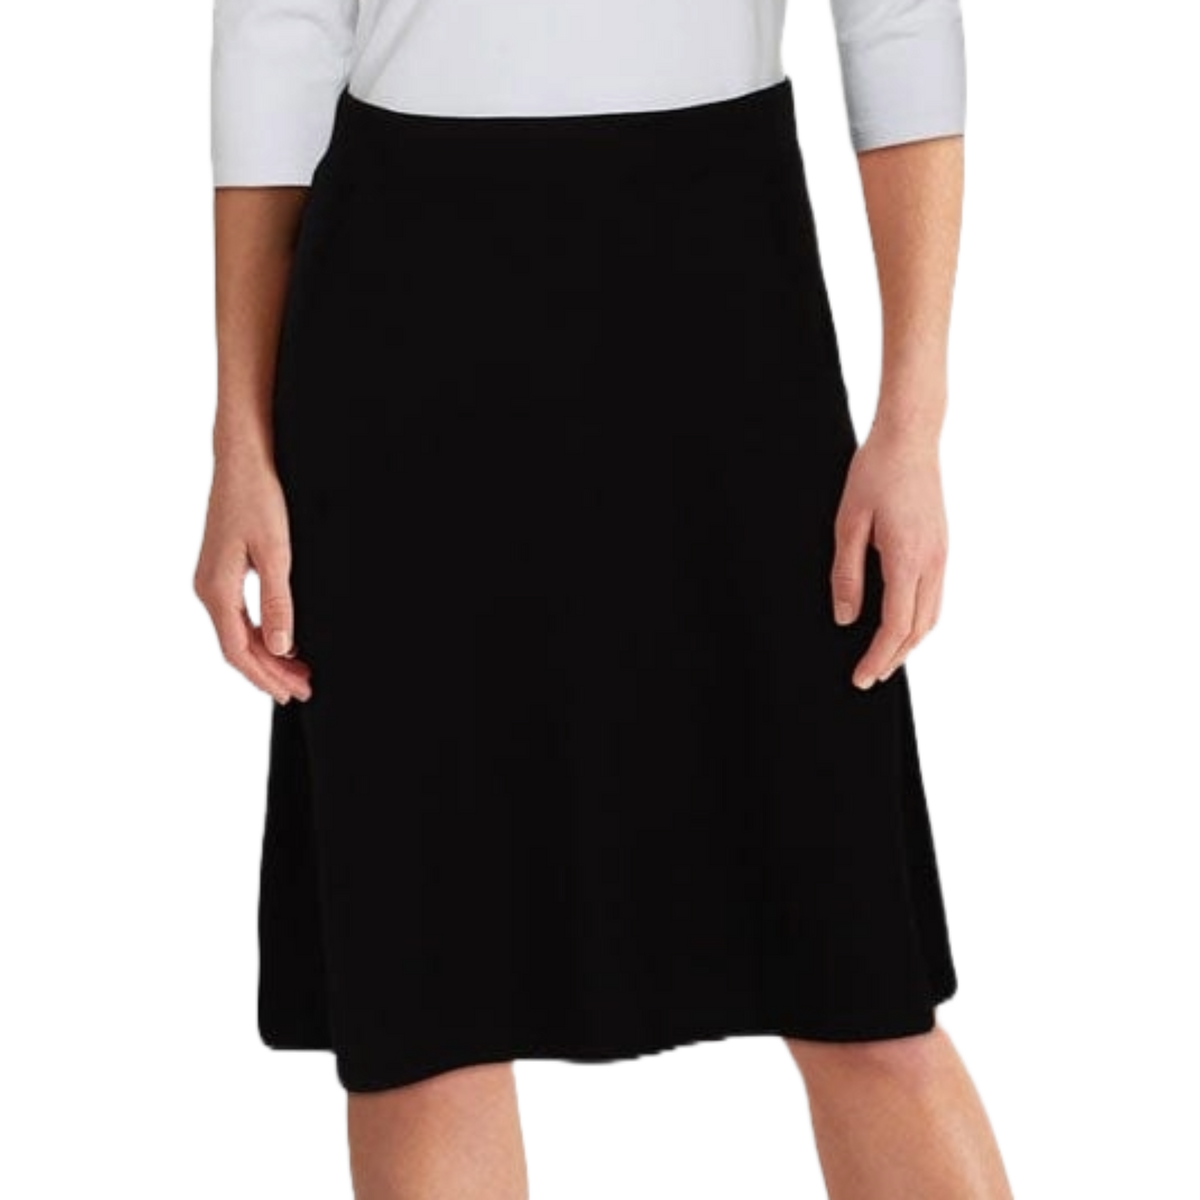 Black A-Line Skirts (Defective Sizing) - 2XL